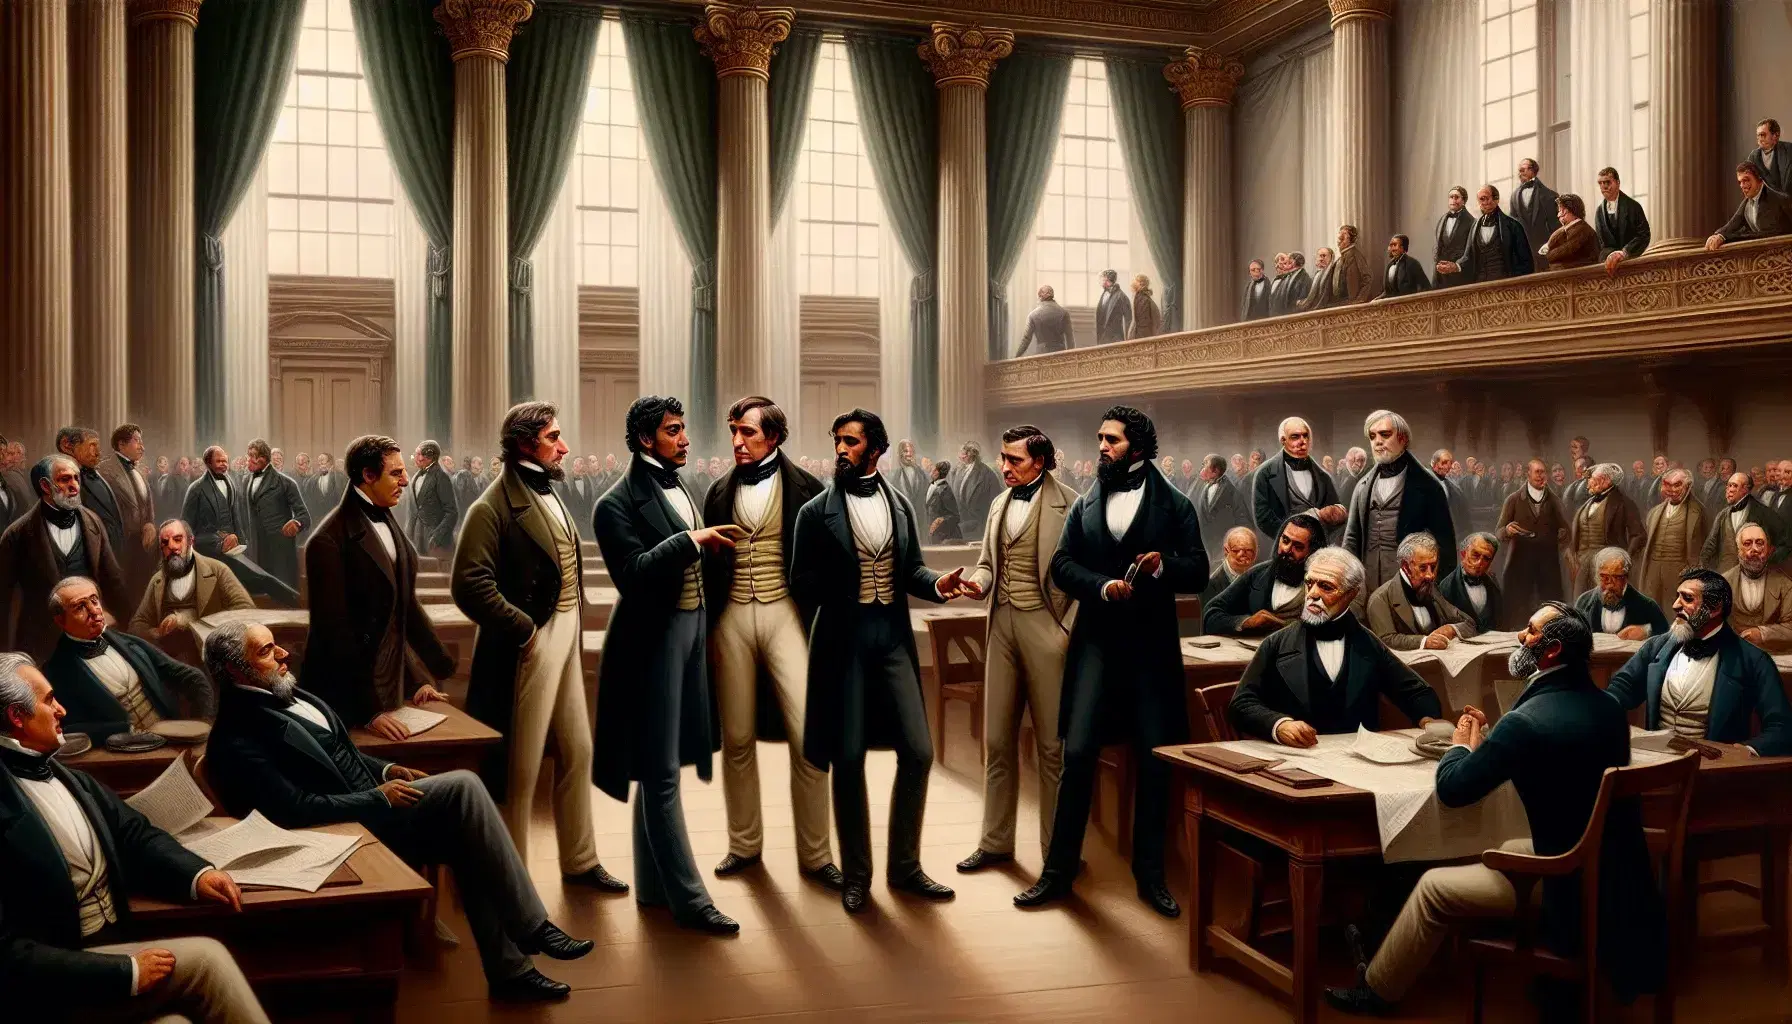 Mid-19th century political meeting in a grand hall with diverse men in period attire engaged in earnest discussion, bathed in soft natural light.